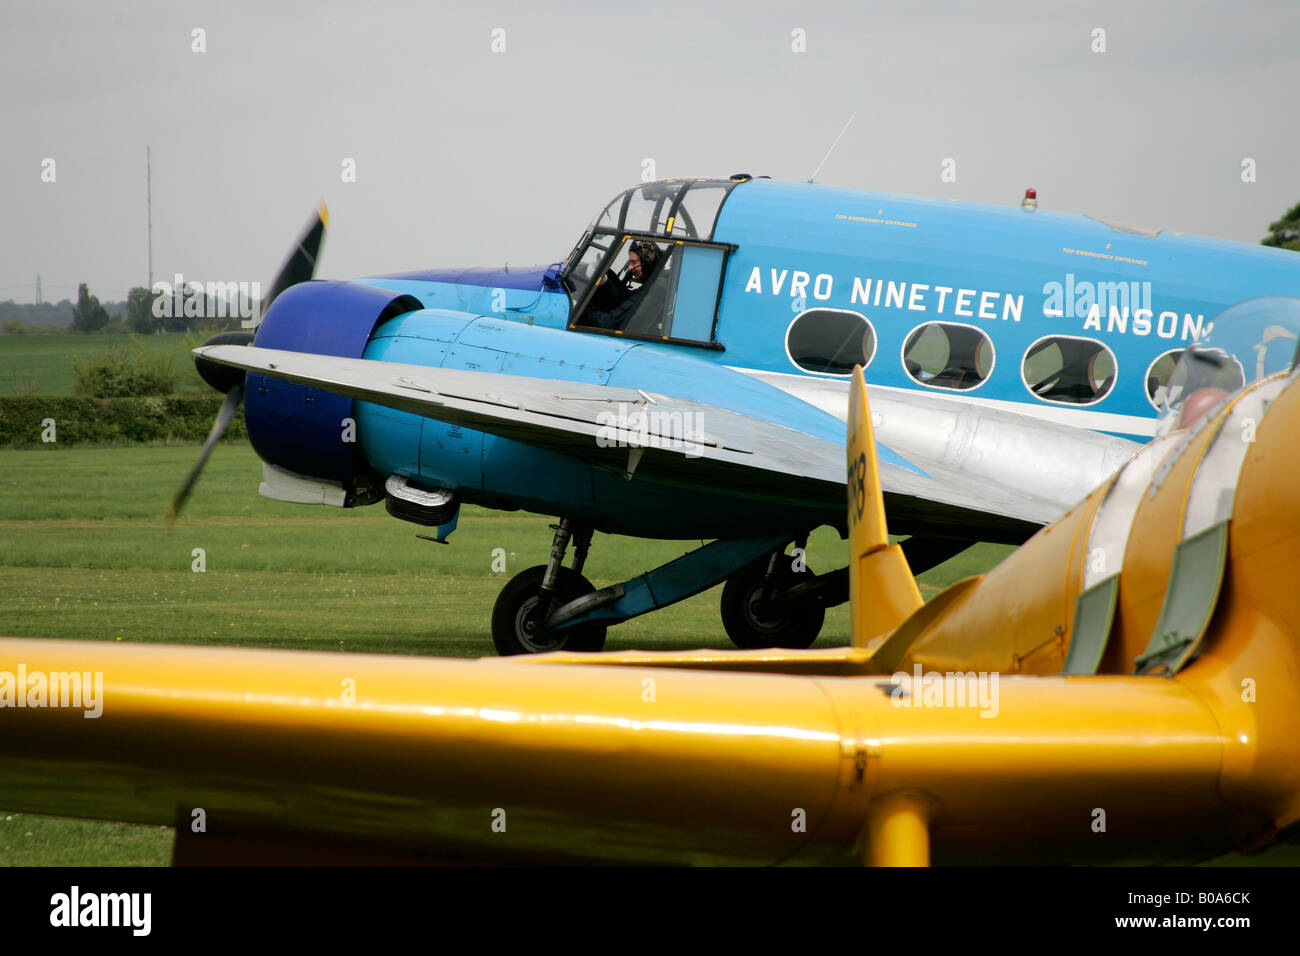 AVRO DICIANNOVE ANSON aereo,SHUTTLEWORTH COLLECTION AT OLD WARDEN AIRFIELD Foto Stock